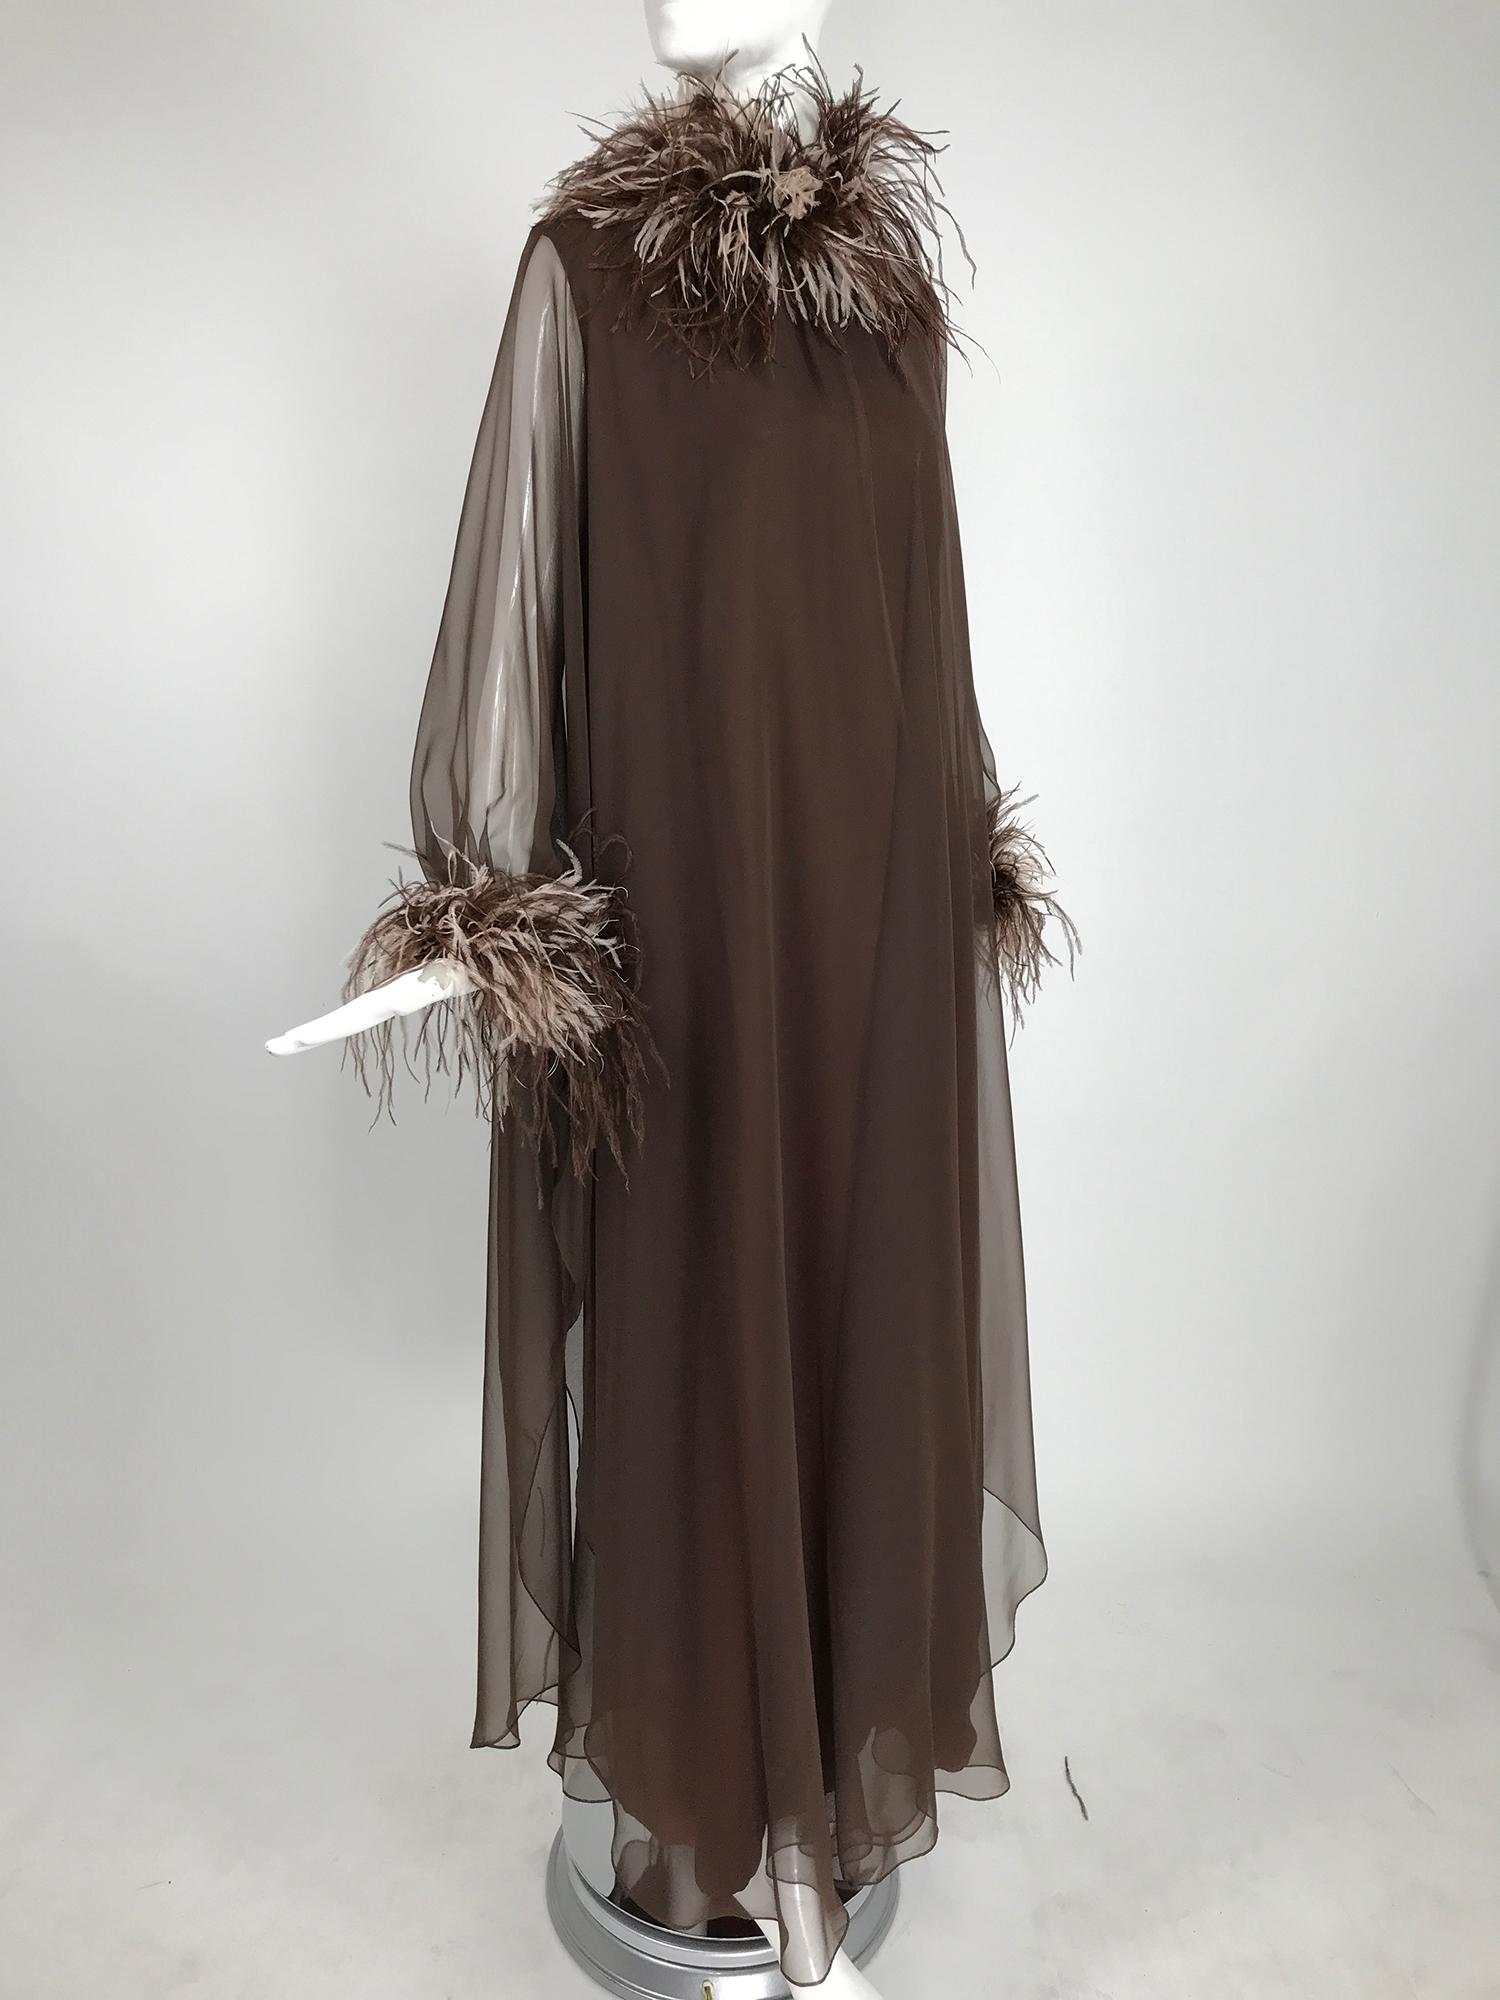 Abe Schrader chocolate brown chiffon and ostrich feather trim caftan from the 1970s.  This dramatic caftan is perfect for at home entertaining. It fits an approximate size medium or a smaller large. The sheer chiffon caftan has bat wing sleeves, the